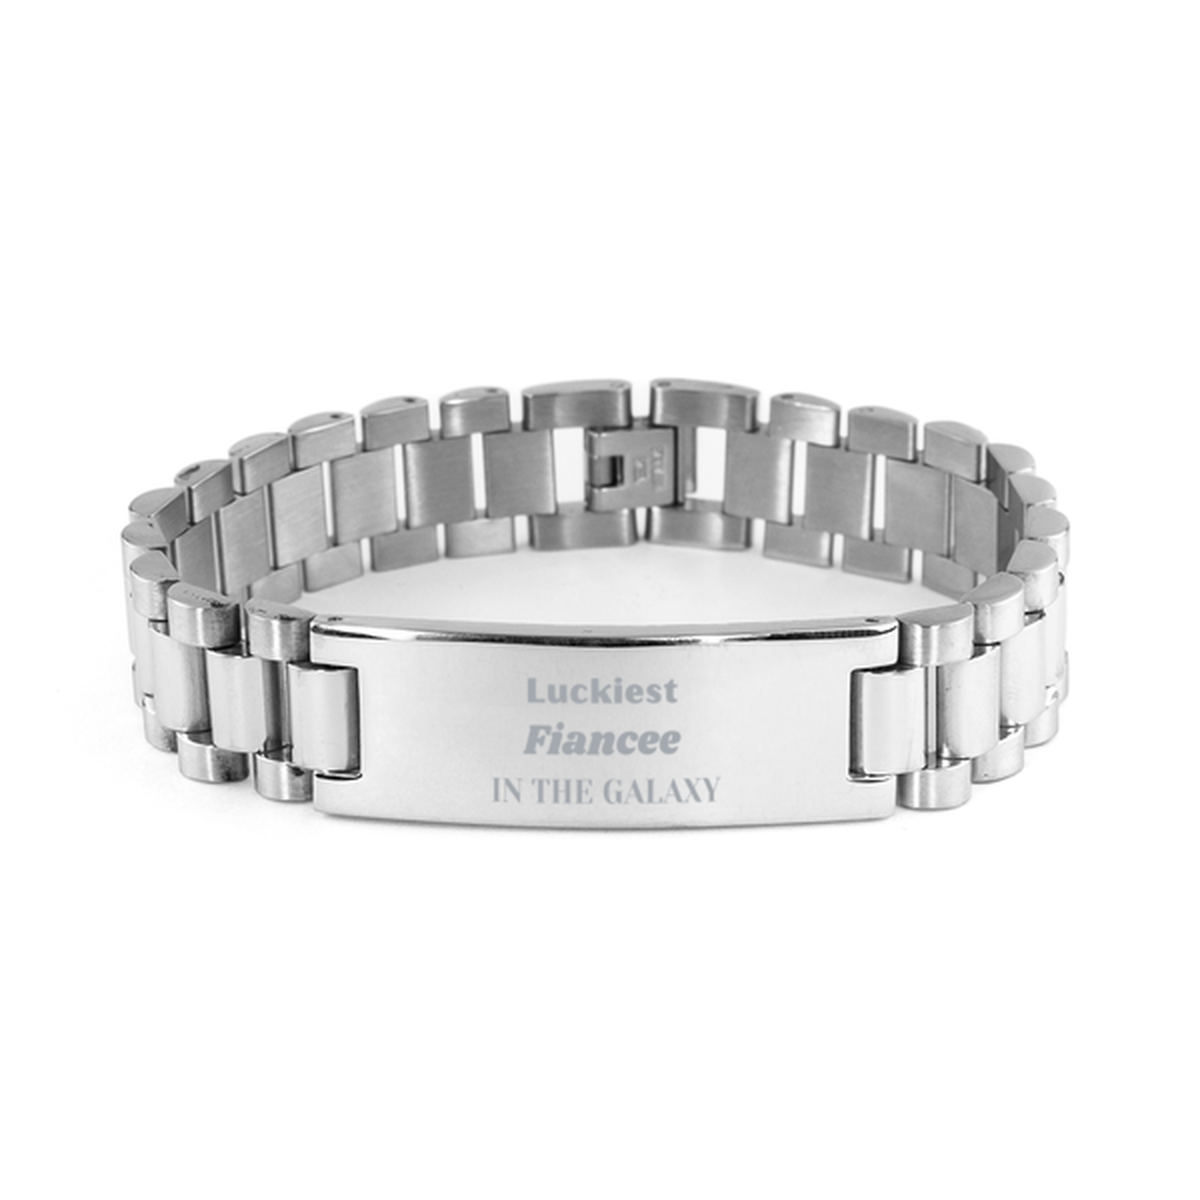 Luckiest Fiancee in the Galaxy, To My Fiancee Engraved Gifts, Christmas Fiancee Ladder Stainless Steel Bracelet Gifts, X-mas Birthday Unique Gifts For Fiancee Men Women